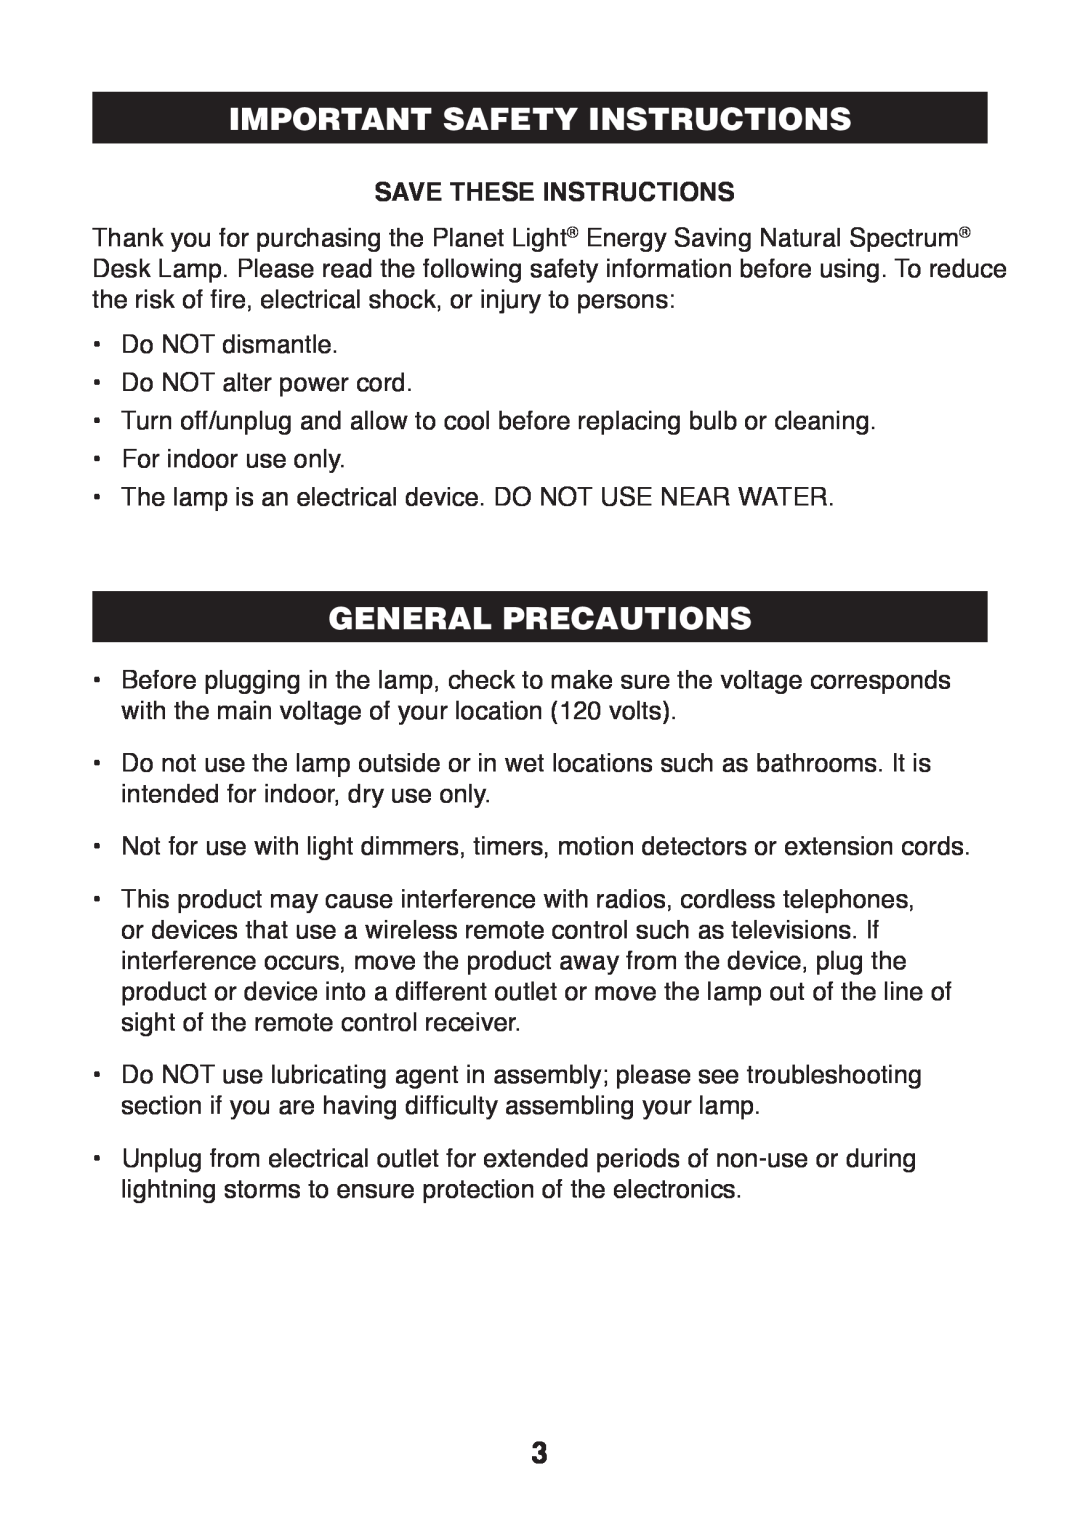 Verilux PL03 manual Important Safetyheaderinstructions, General Precautions, Save These Instructions 